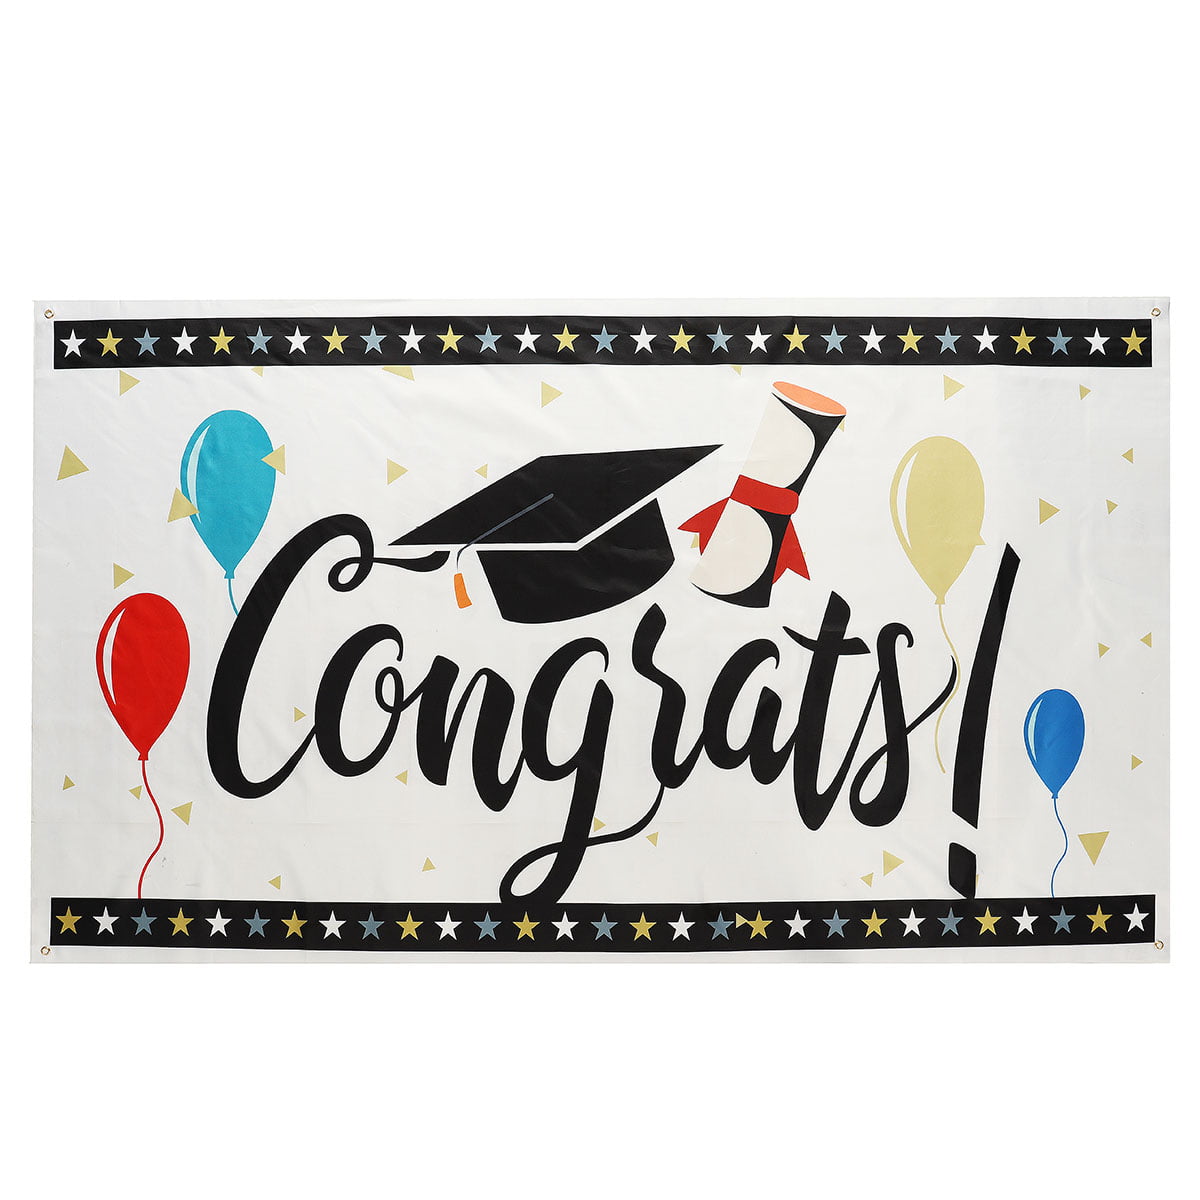 Congratulations Class of 2021 Graduation Party Personalized Banner